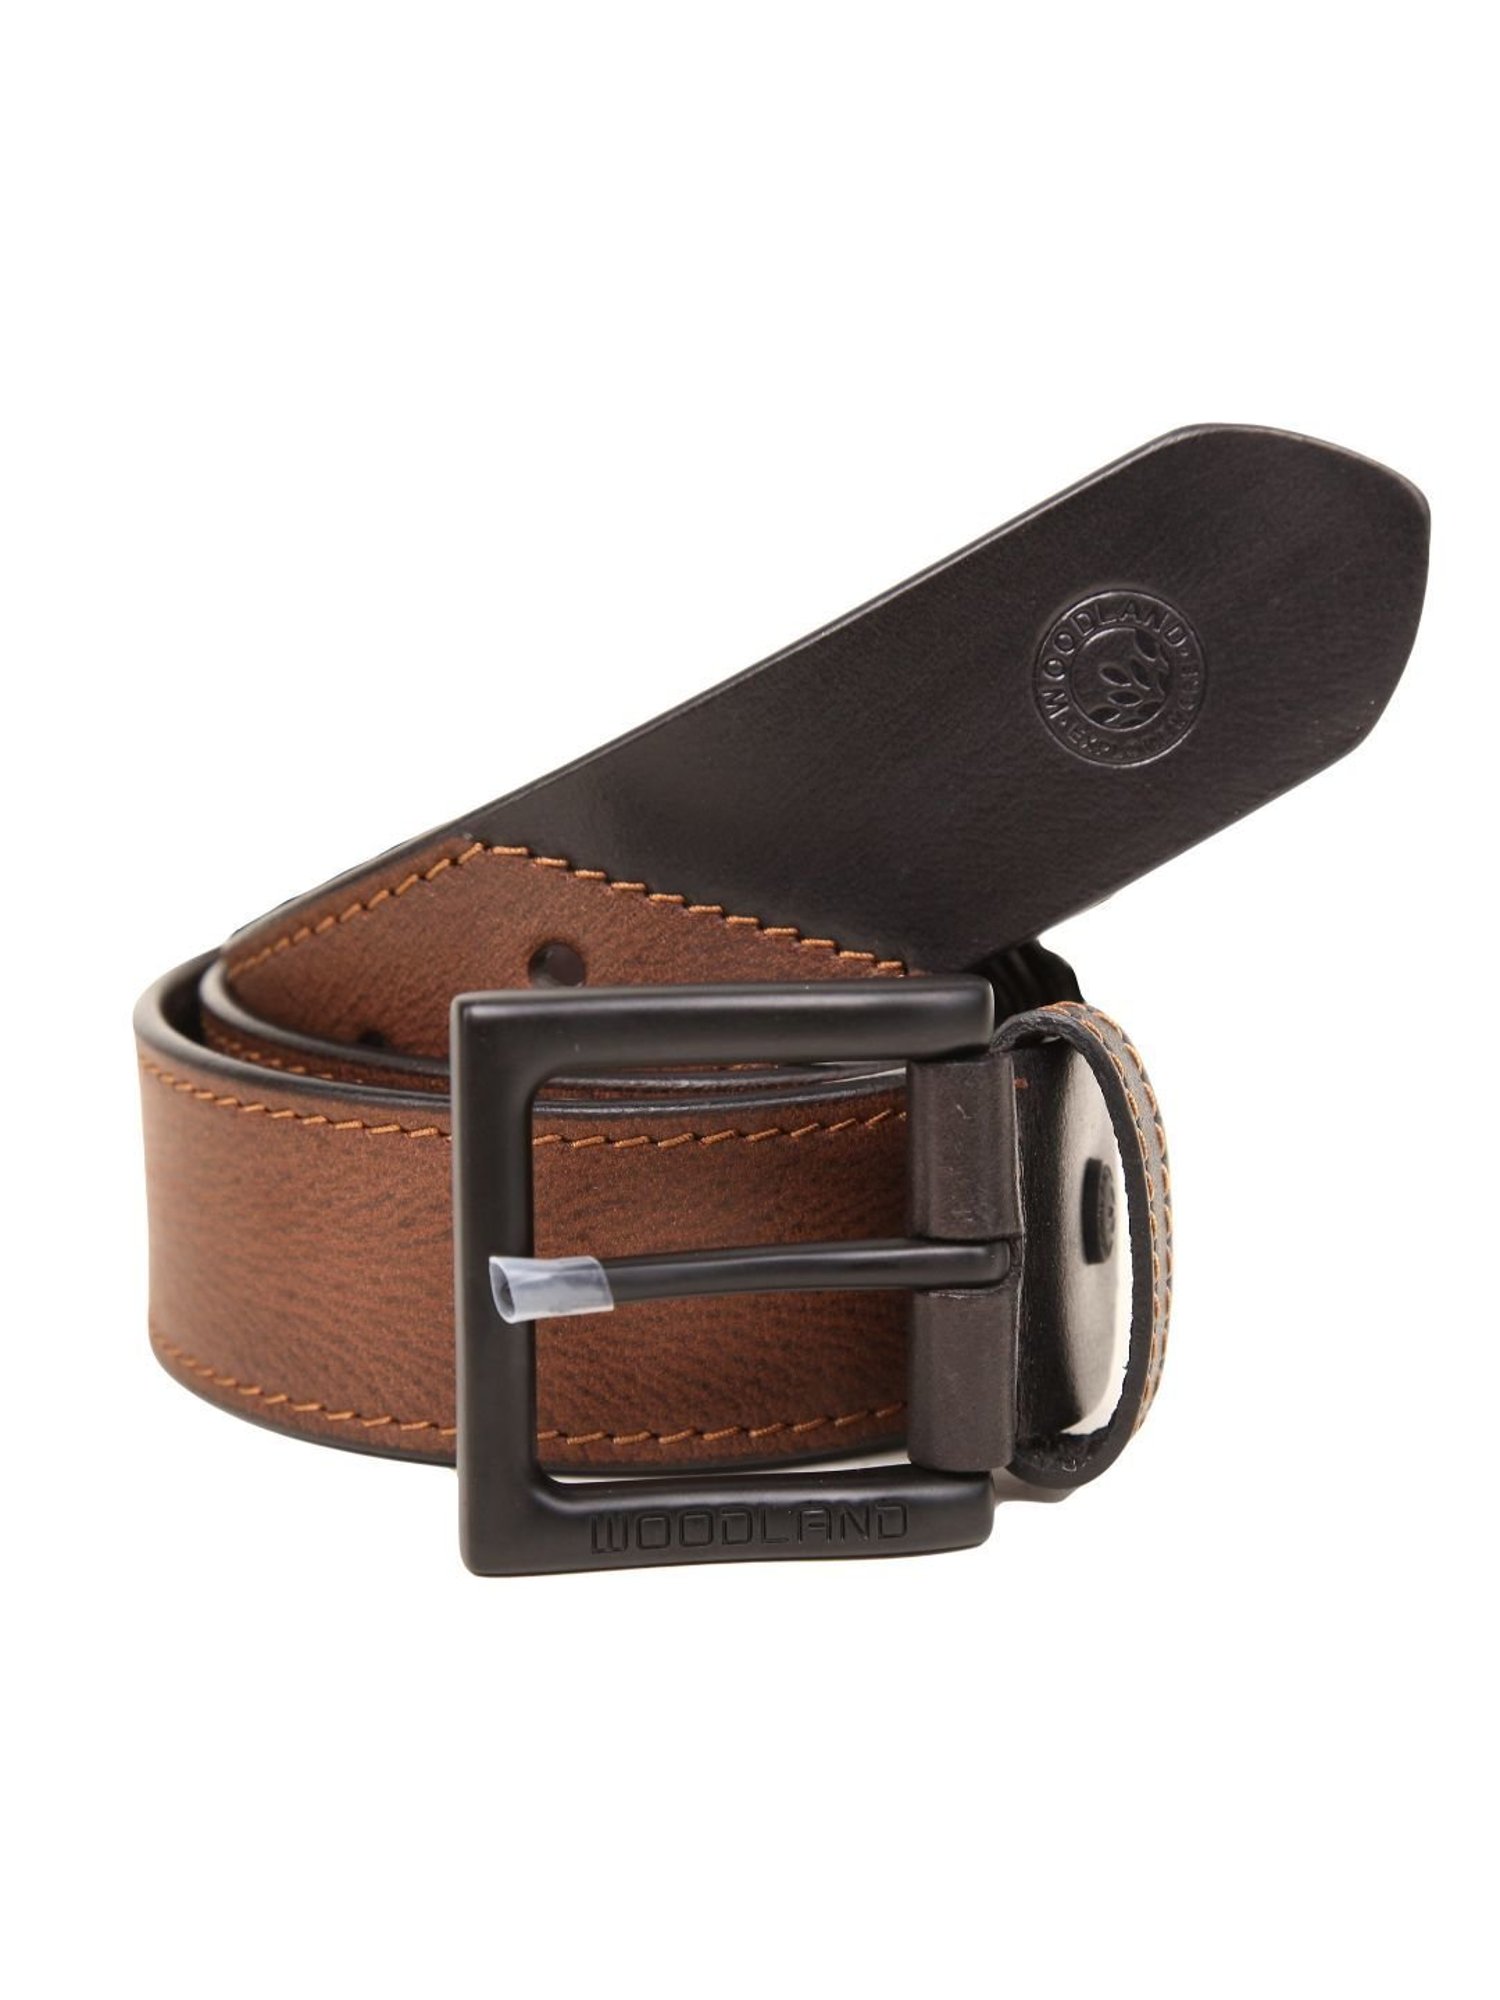 WOODLAND Leather Belt with Buckle Closure For Men (Tan, 36)